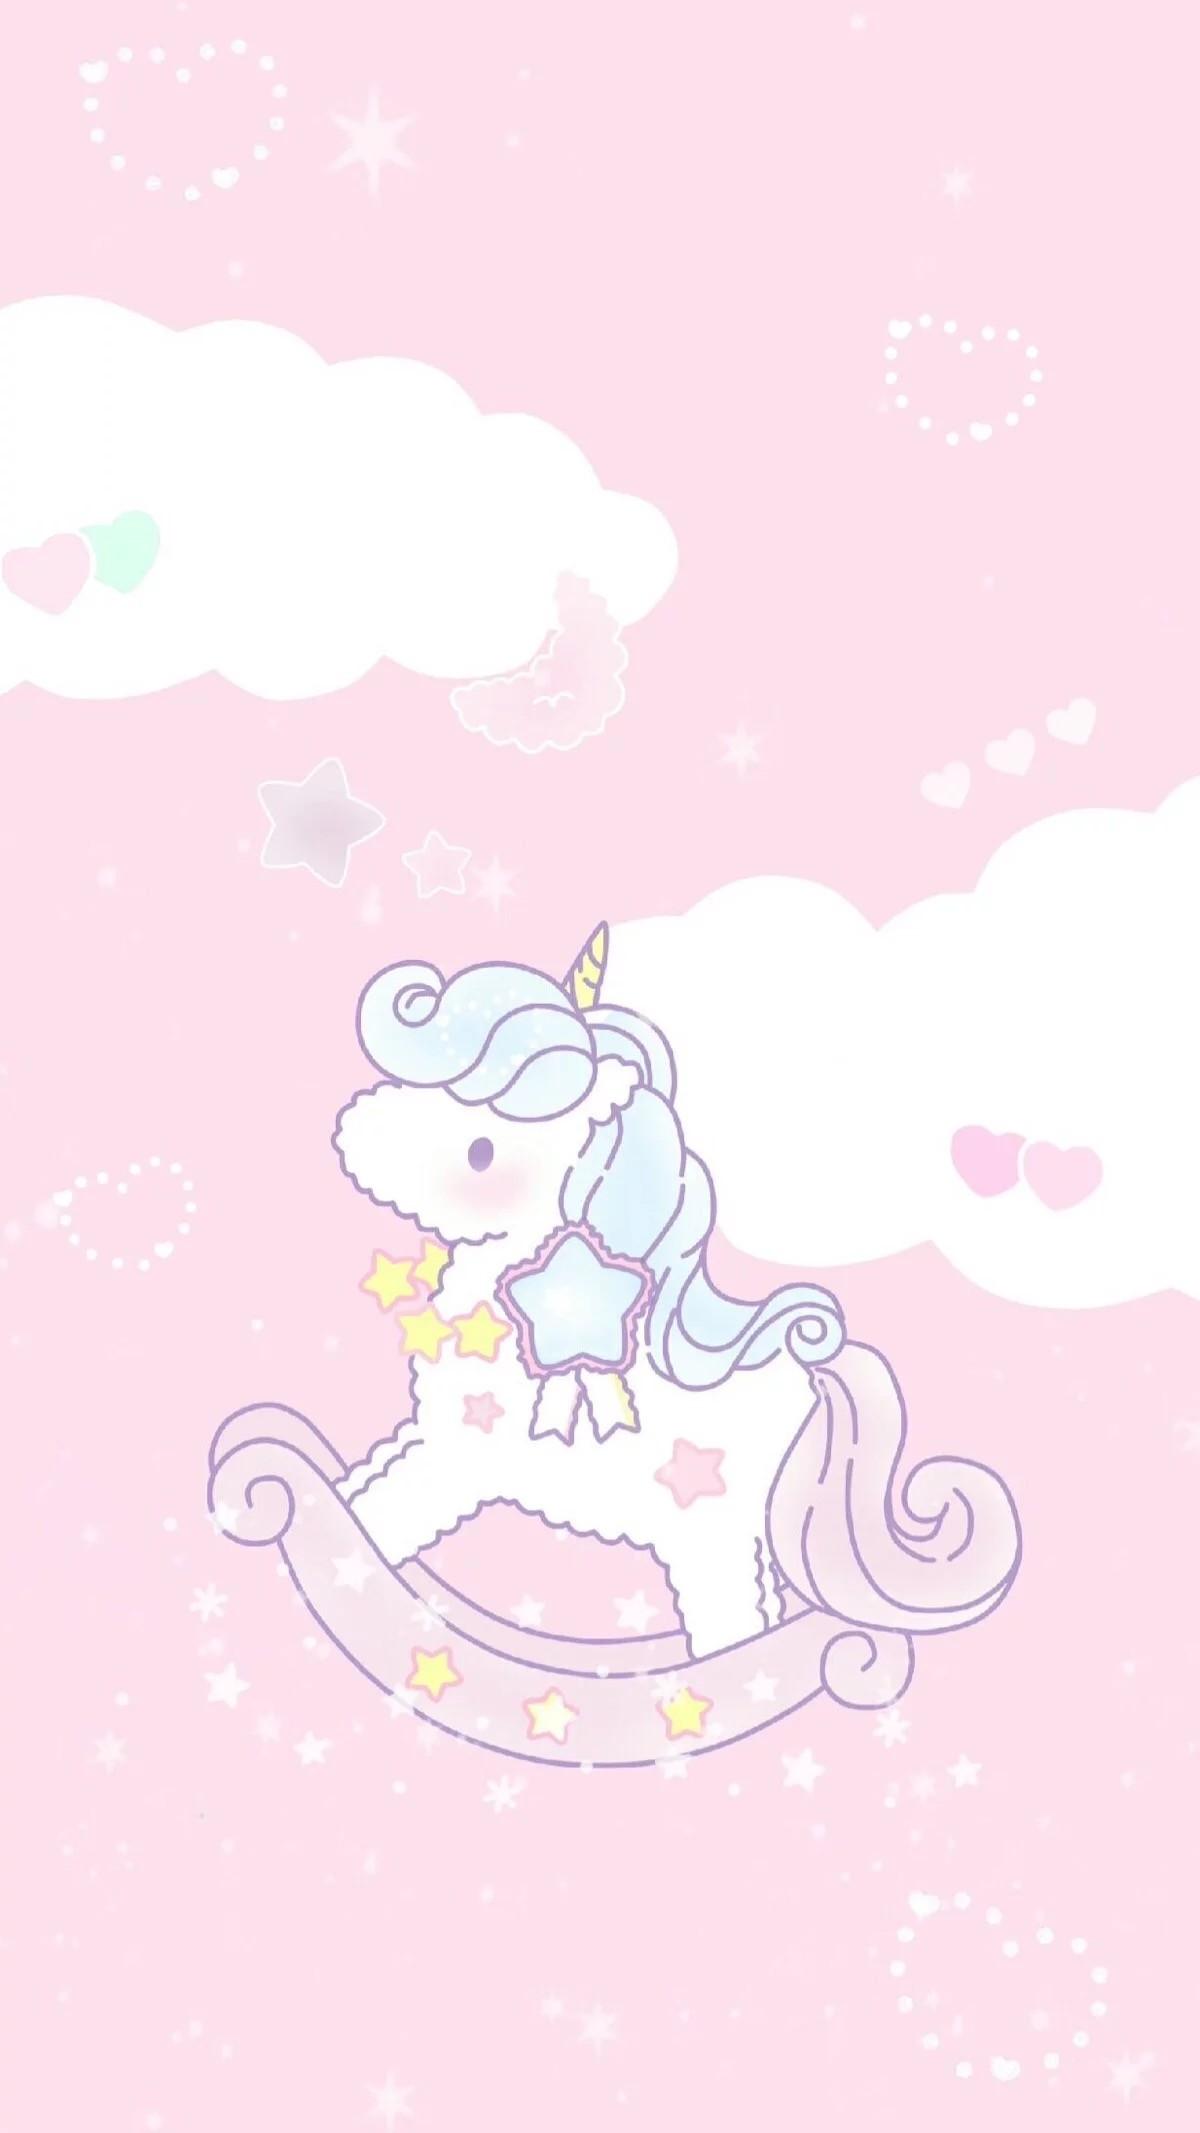 A cute unicorn is riding on top of the clouds - Unicorn